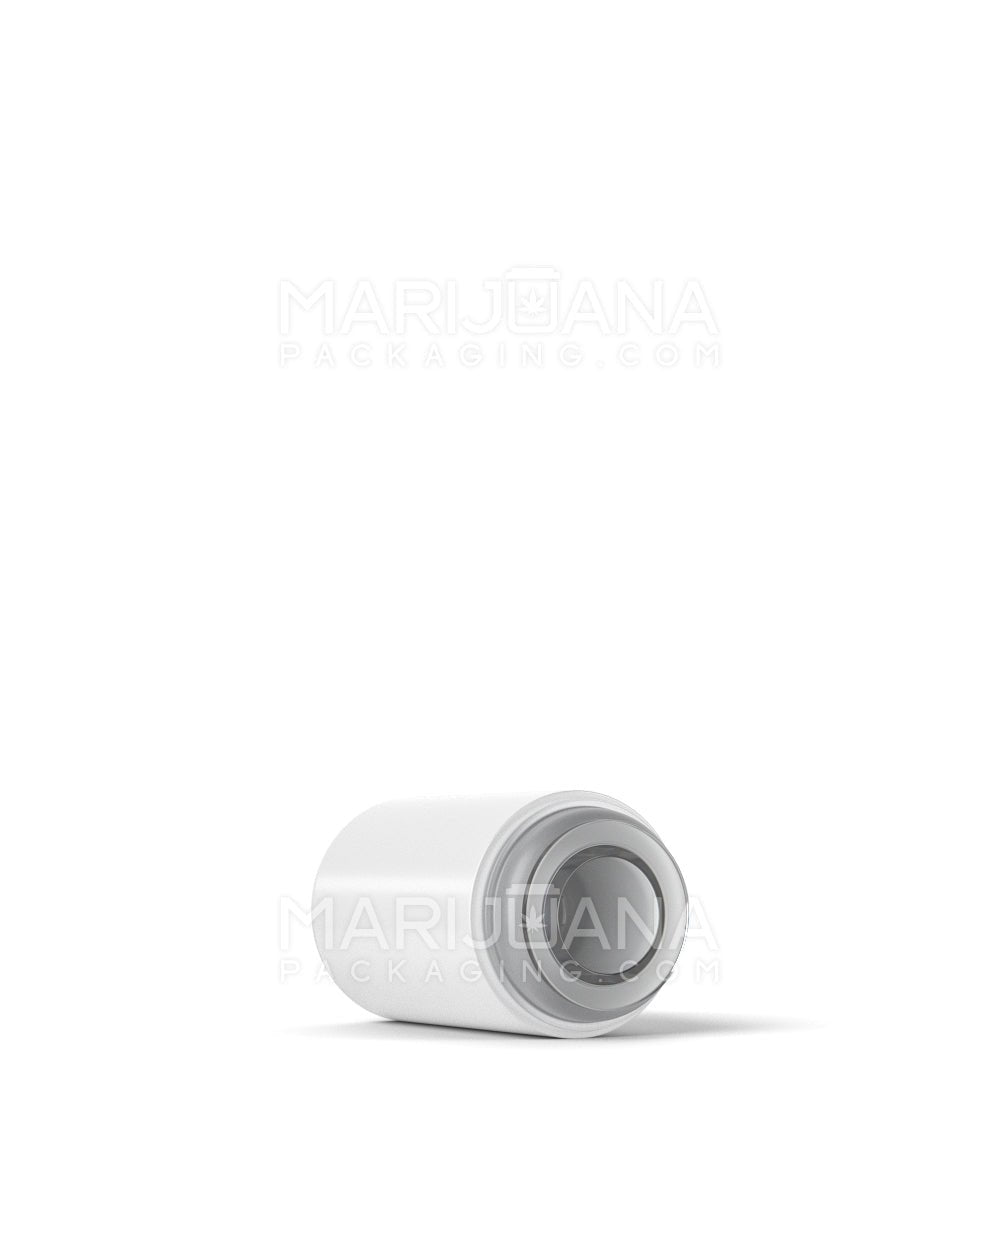 RAE | Round Vape Mouthpiece for Hand Press Plastic Cartridges | White Plastic - Hand Press - 400 Count - 6